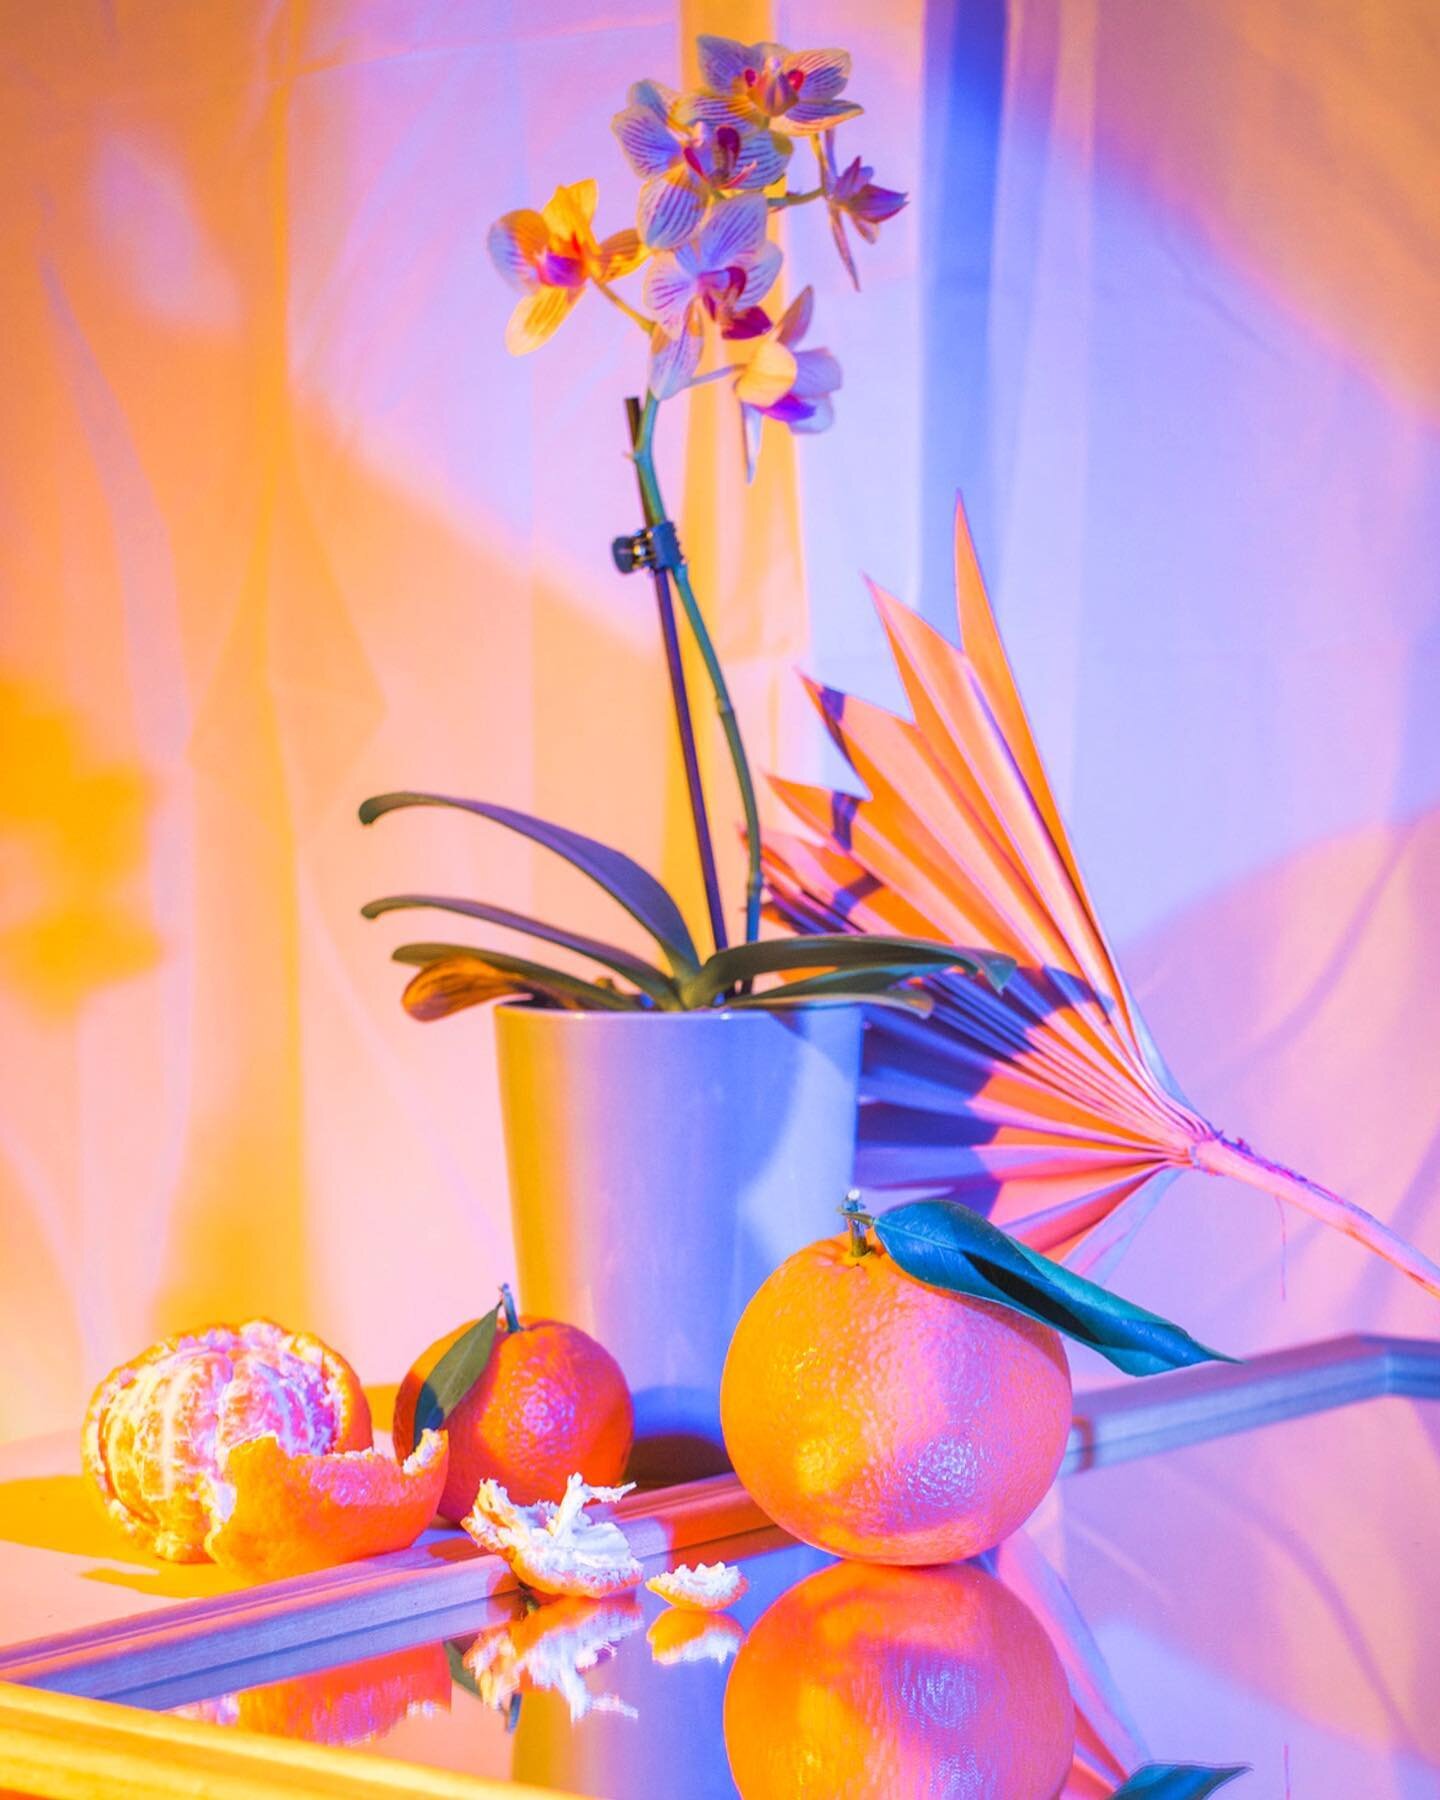 Orchids and Oranges 🍊 

Still life, lighting, and photog by me✨
.
.
.
.
.
.
.
.
.
#artbyalifutrell #stilllifepainting #stilllifephotography #stilllifereference #paintingreference #colorfulstilllife #contemporaryphotography #studiophotography #losang